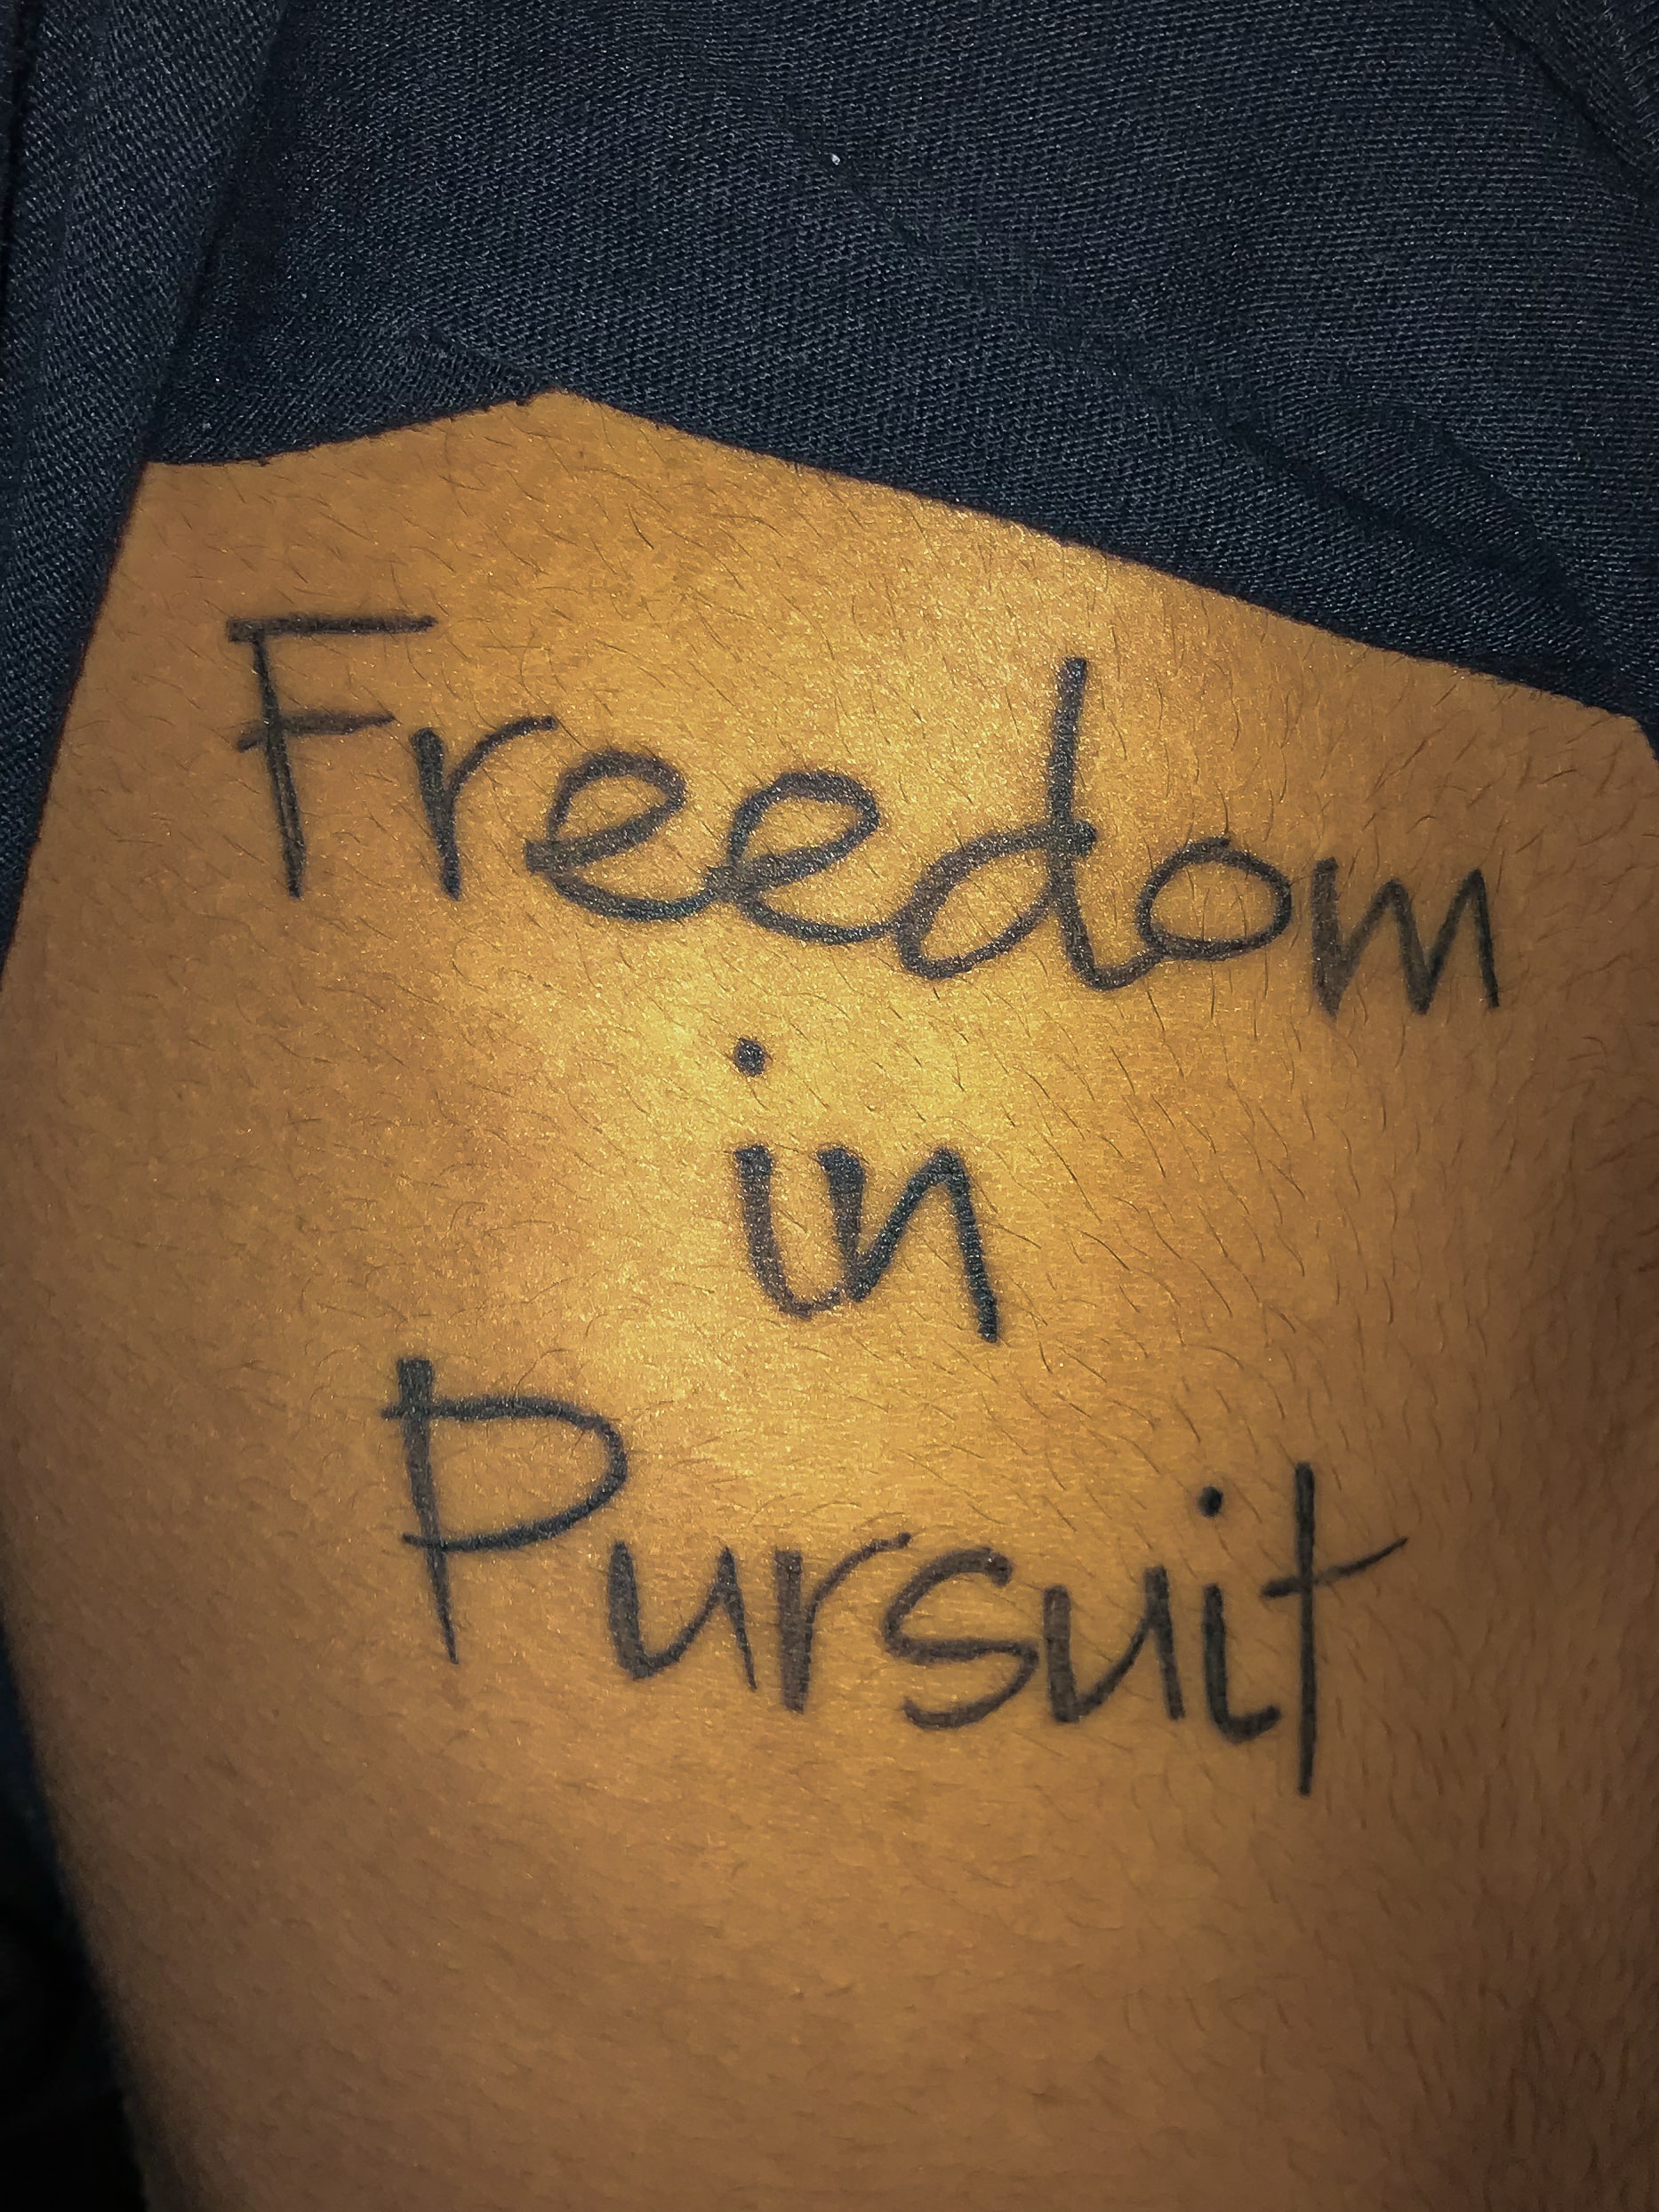 This tattoo is from Isaac Langdon. This represents the times that he was held bondage in deep sins and being told he could receive freedom. It took him a while to realize that he could not receive freedom until he pursued the Father. After a trip wi